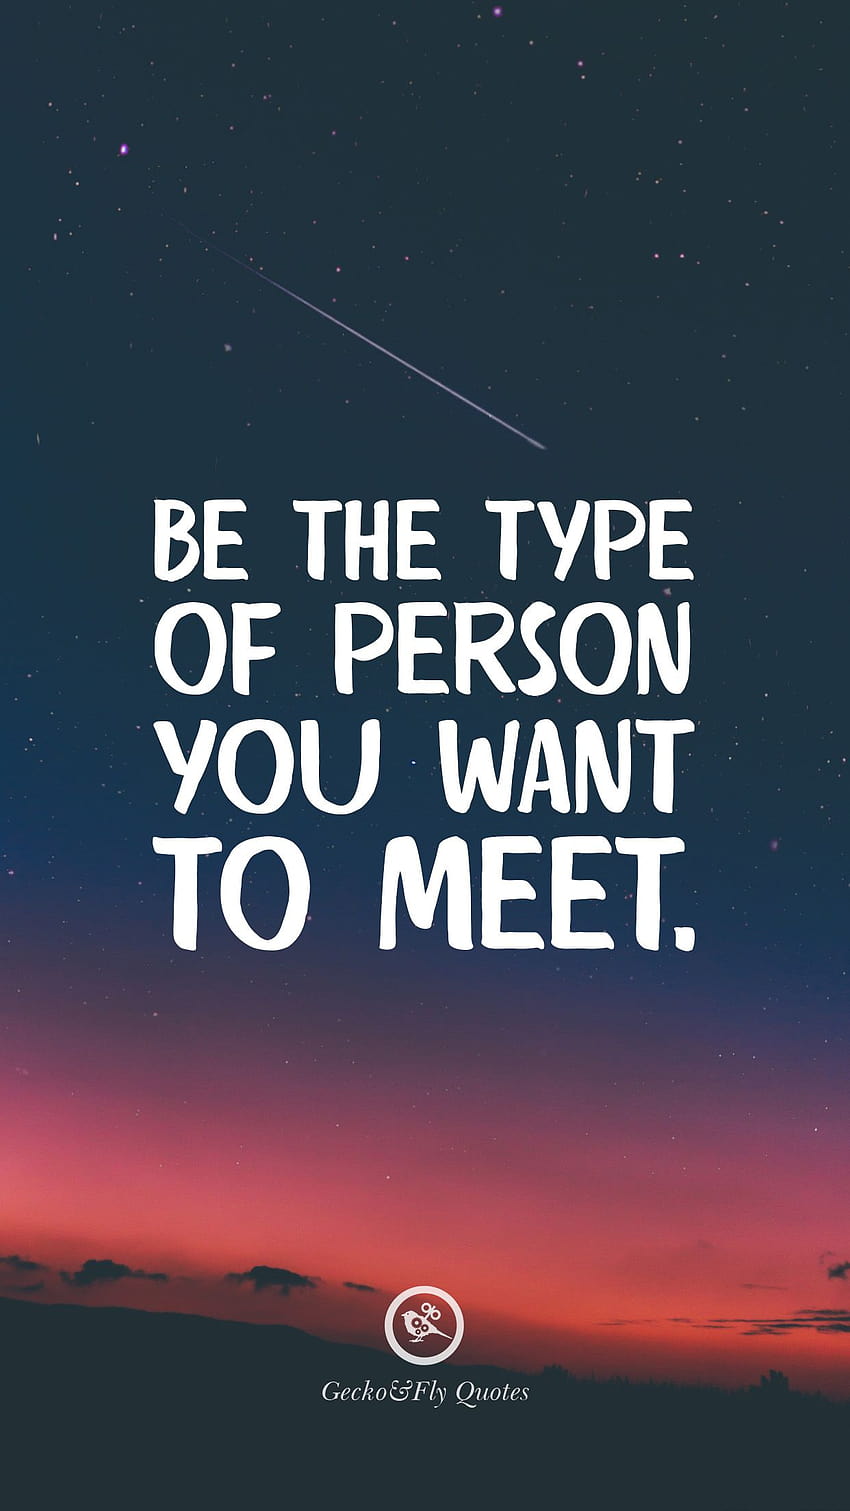 Be the type of person you want to meet., motivational quotes android HD phone wallpaper